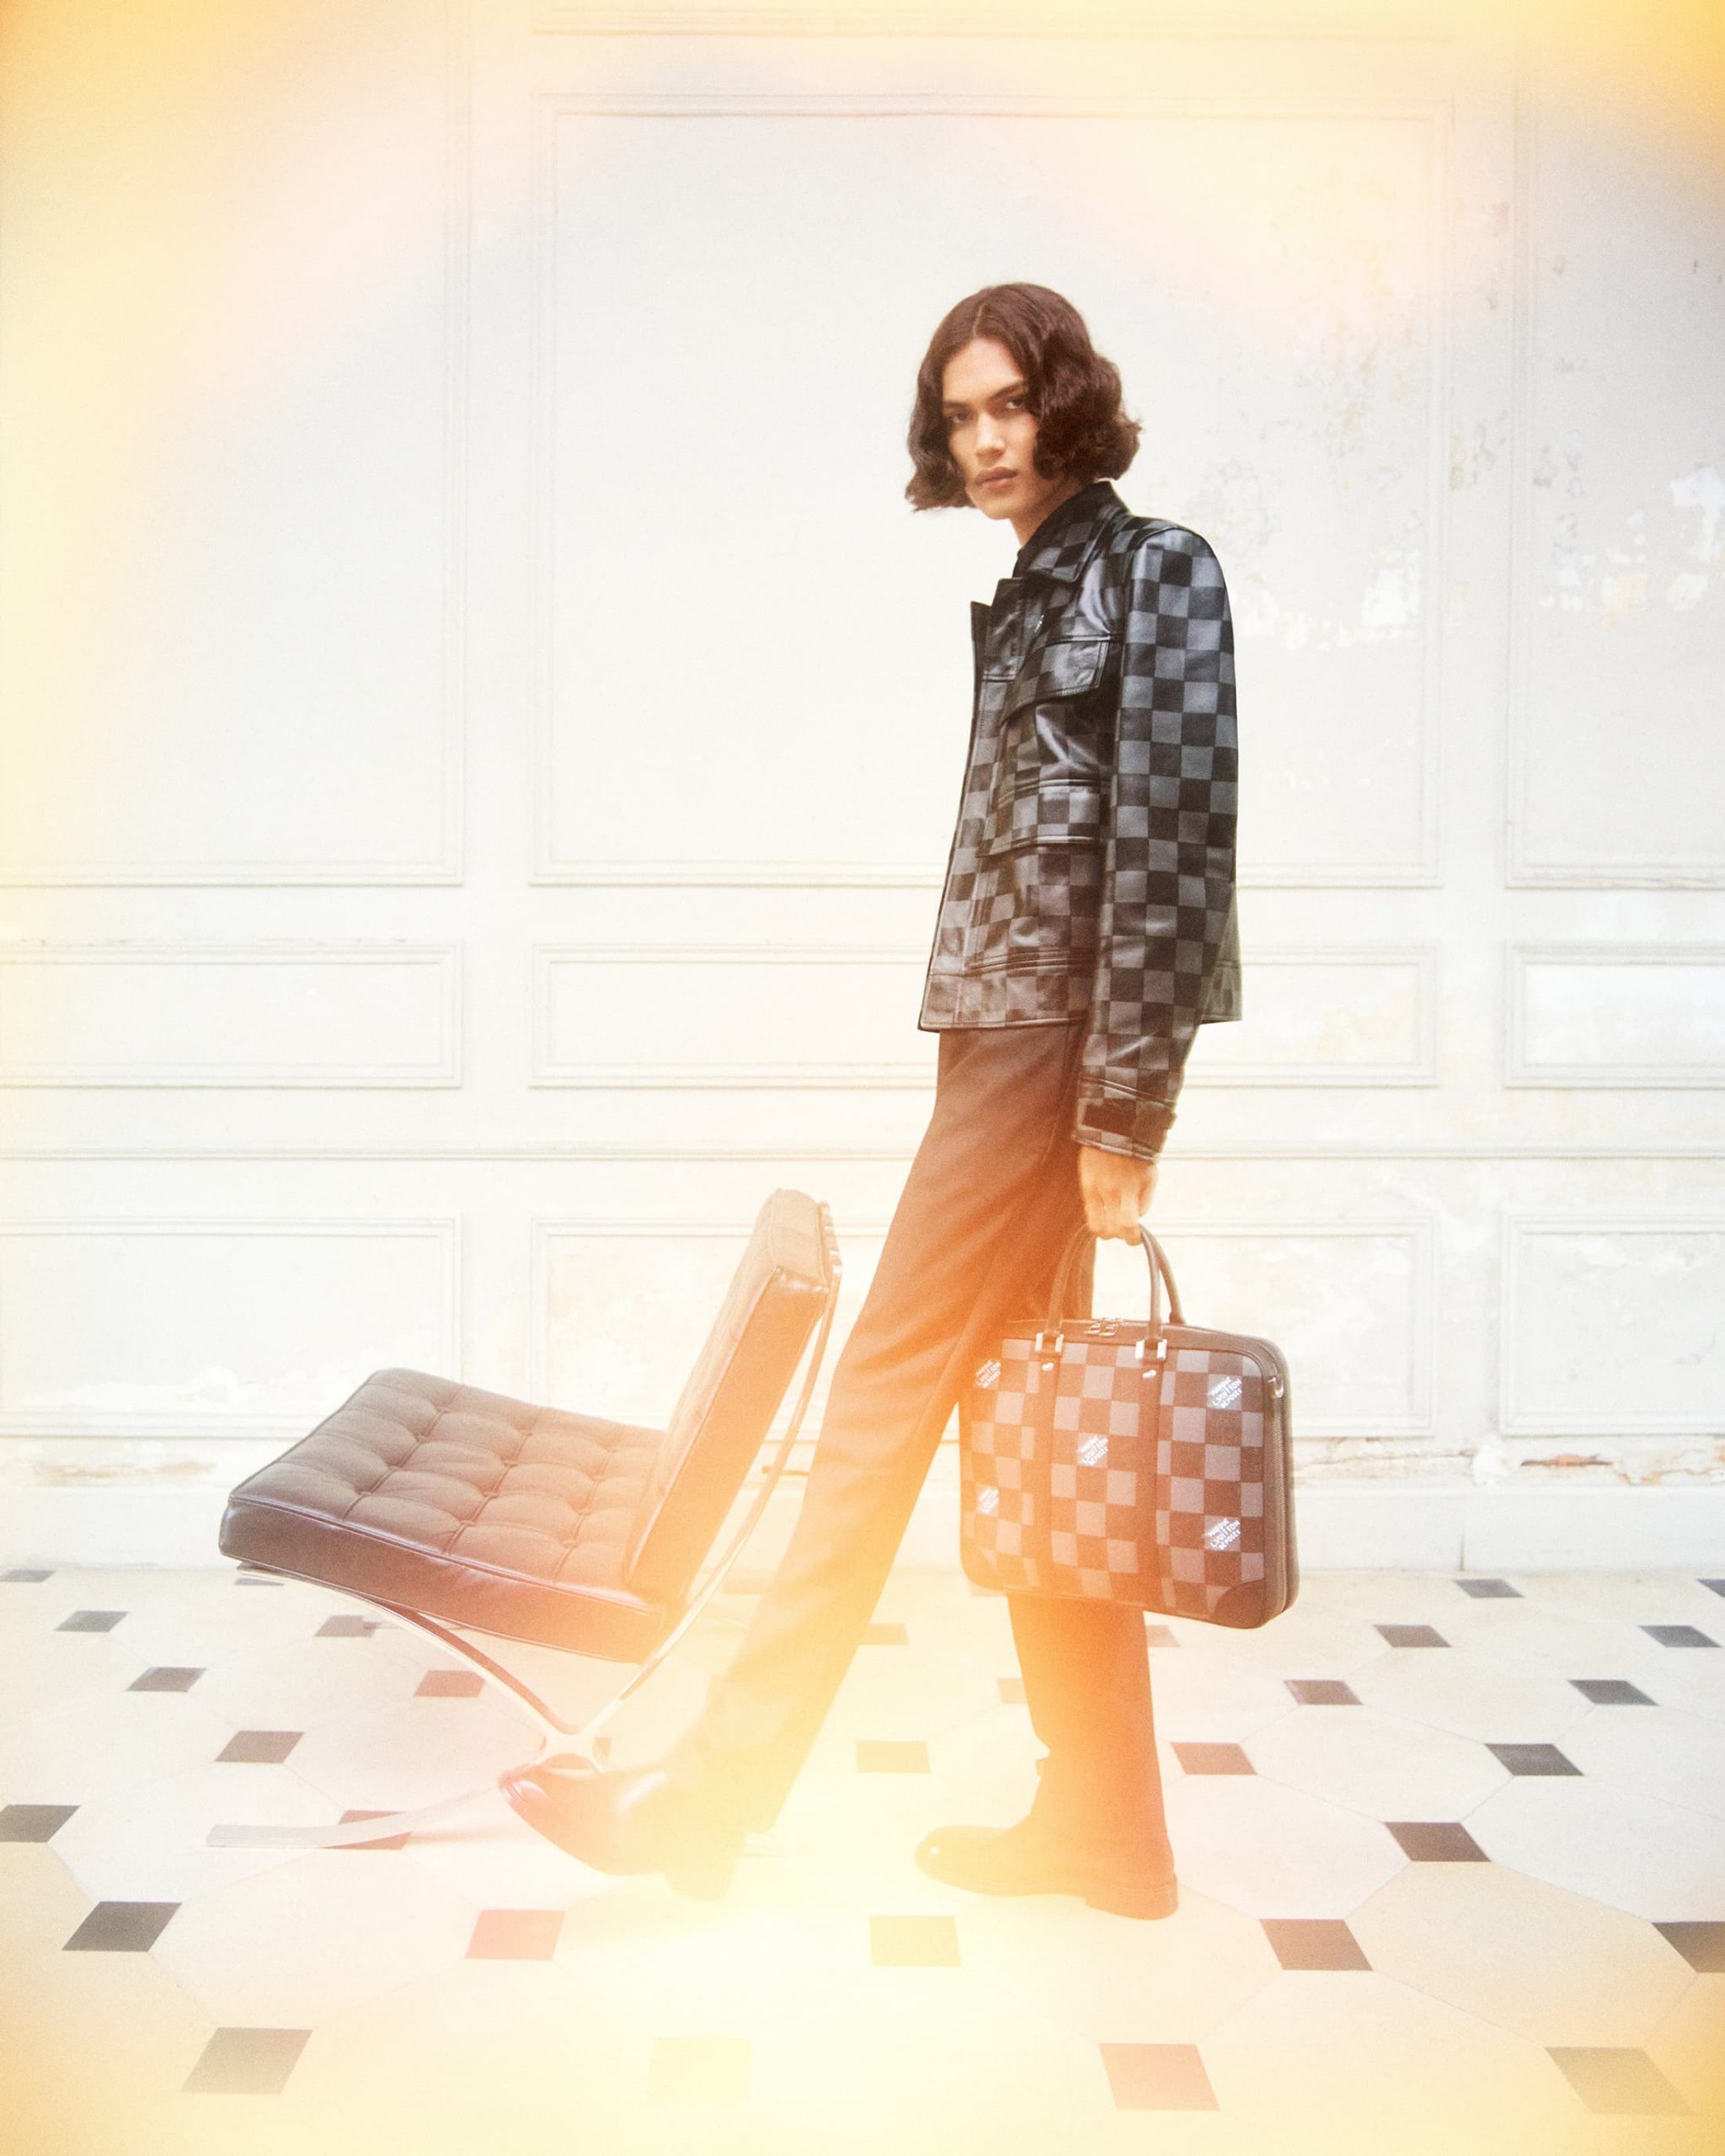 Louis Vuitton Brings Rainbow with Its Fall 2021 Capsule Collection